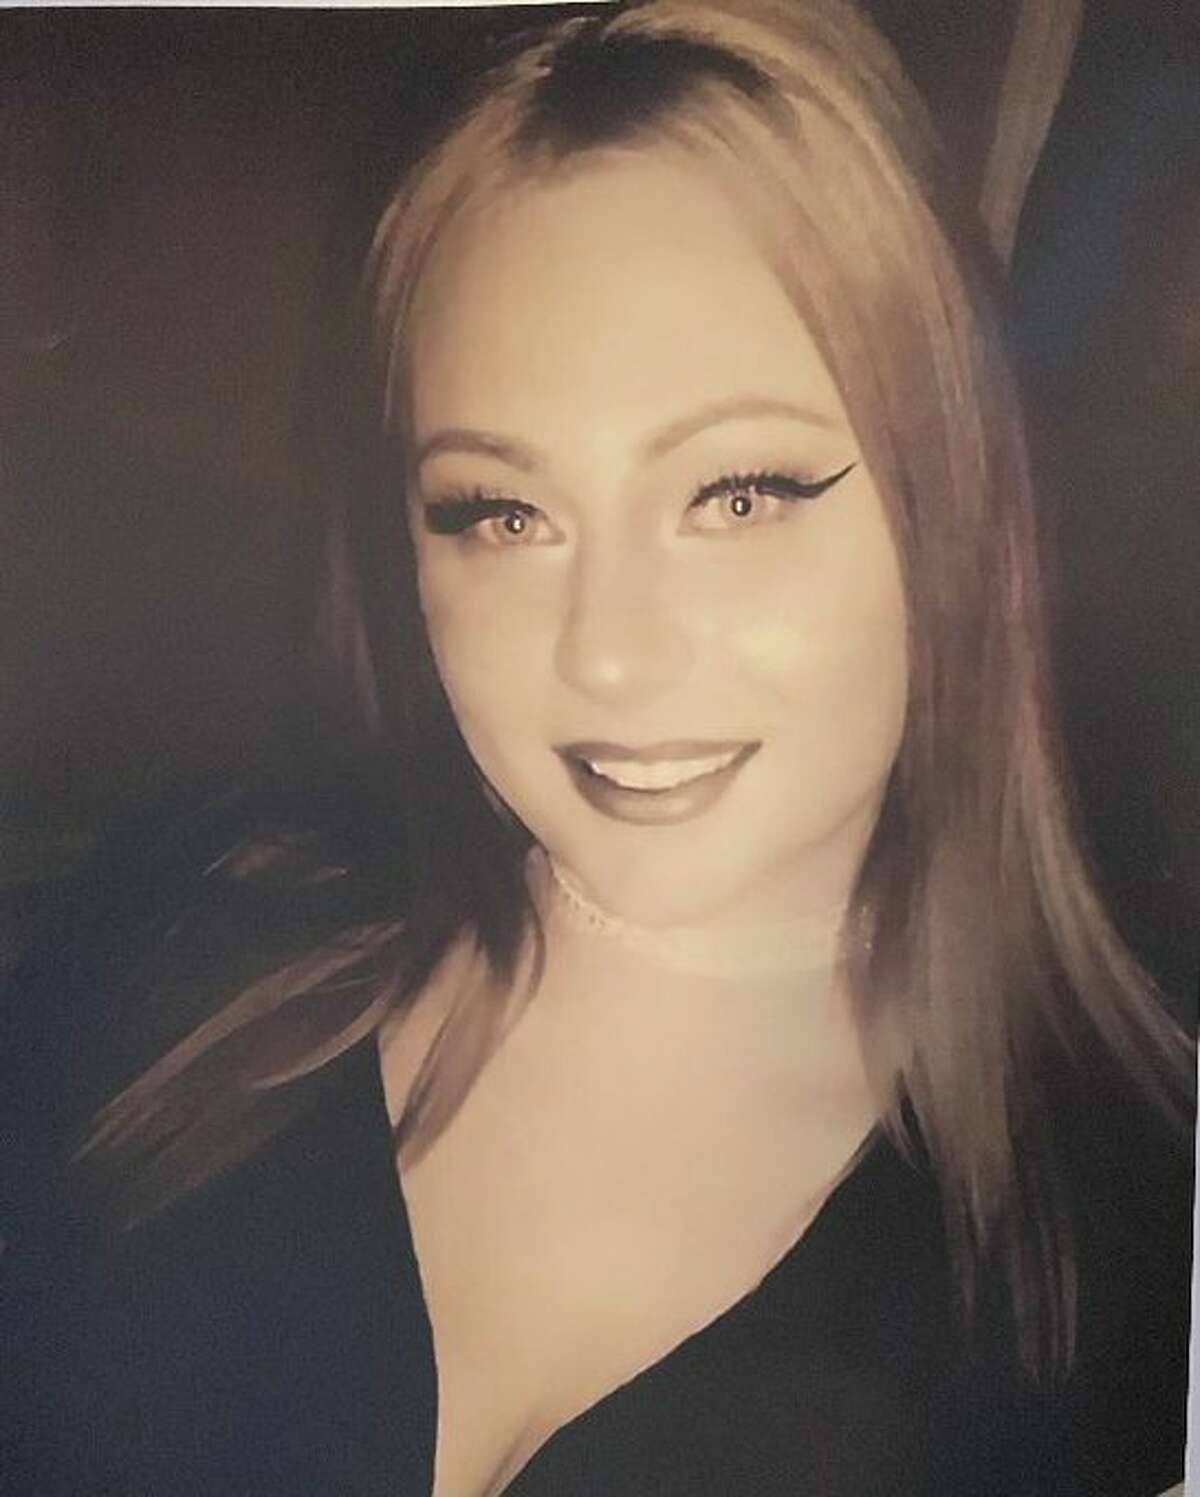 Allyzibeth Lamont, 22, known as “Ally,” who was murdered on Oct. 28, 2019 in the Local No. 9 deli in Johnstown where she worked. Her boss, Georgios Kakavelos is serving life in prison without parole. The case will be the subject of Monday night's episode of People Magazine Investigates.